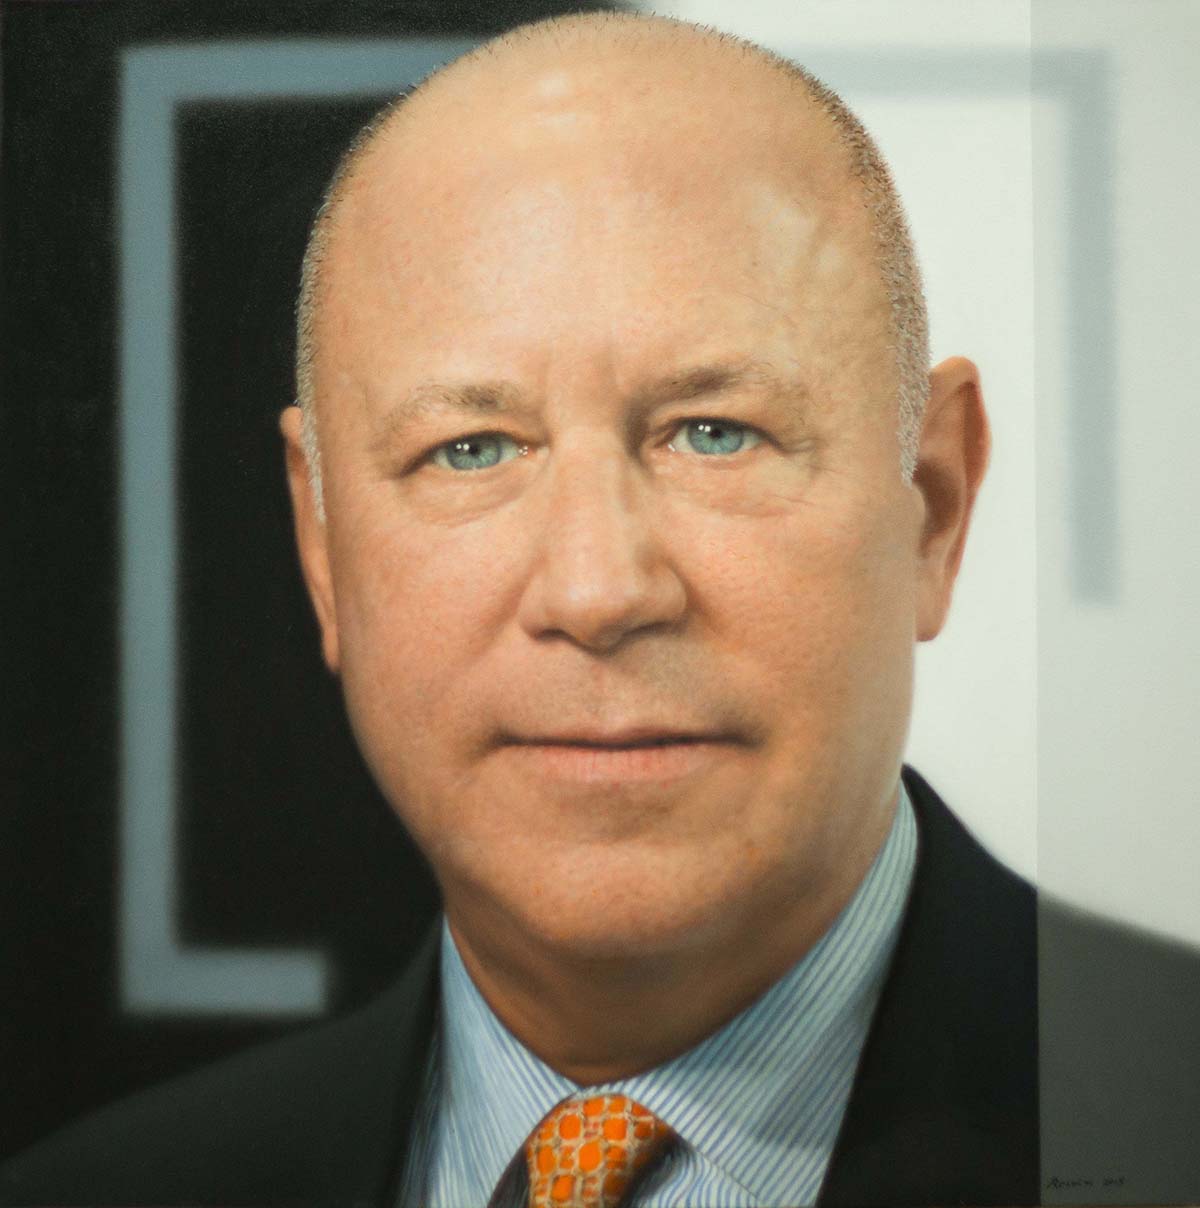 Jeff Sprecher, Chairman of NYSE, personal collection